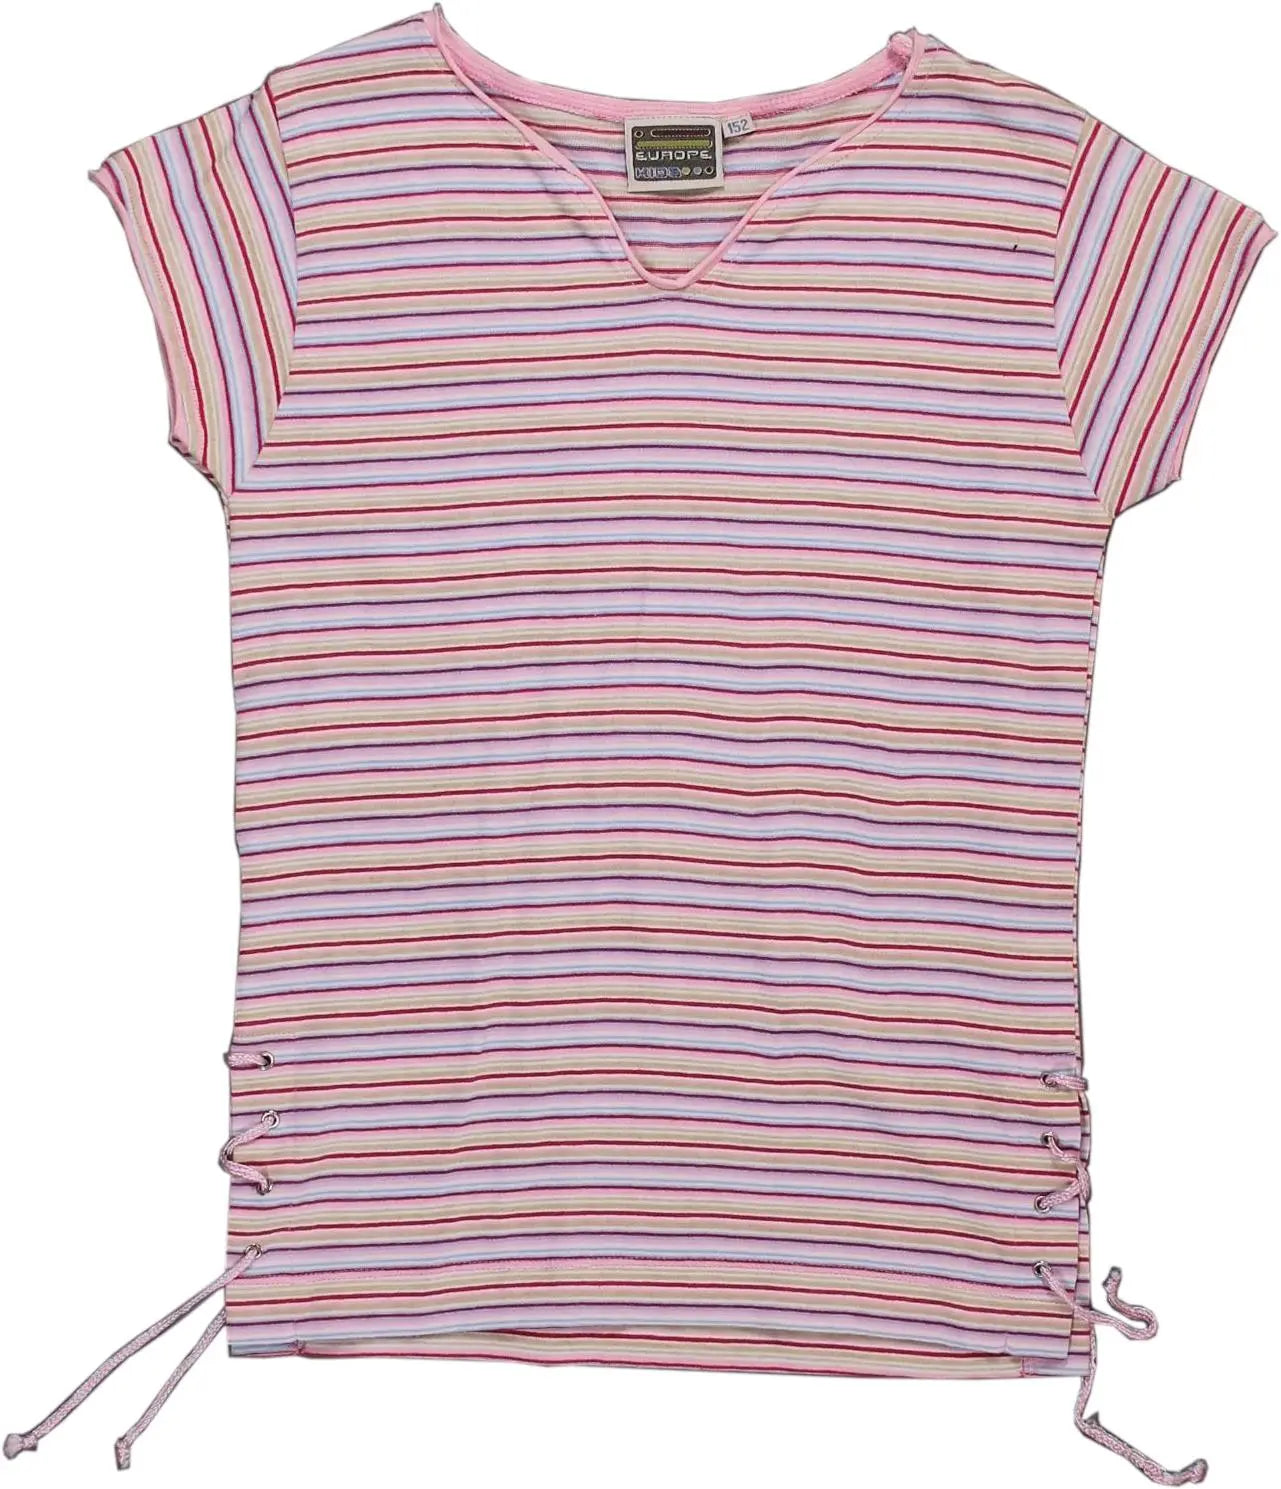 Europe Kids - PINK0466- ThriftTale.com - Vintage and second handclothing